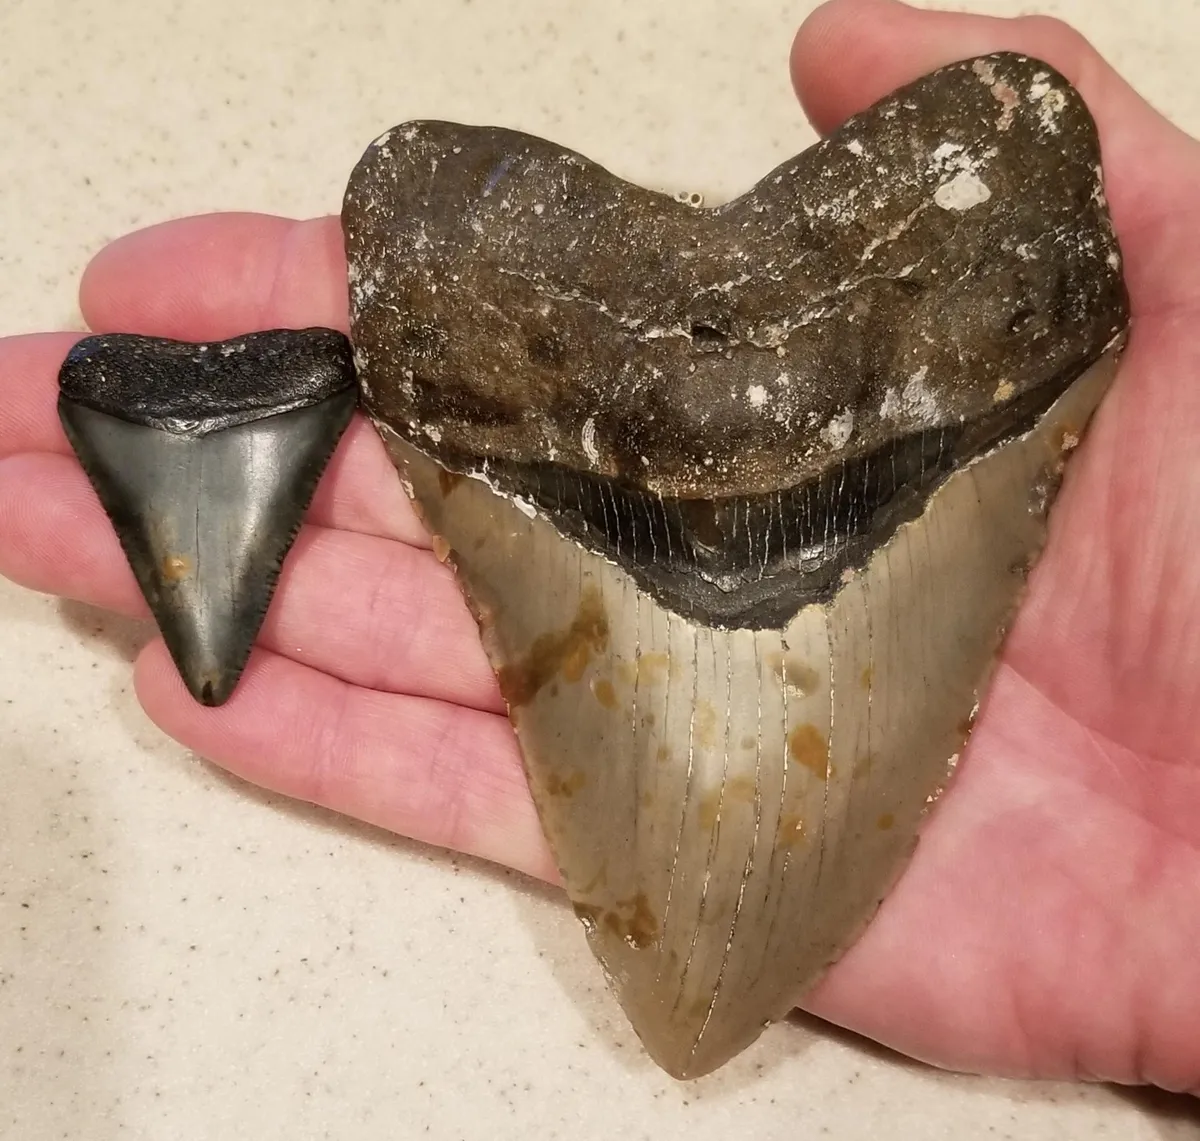 Comparison of great white and megalodon teeth